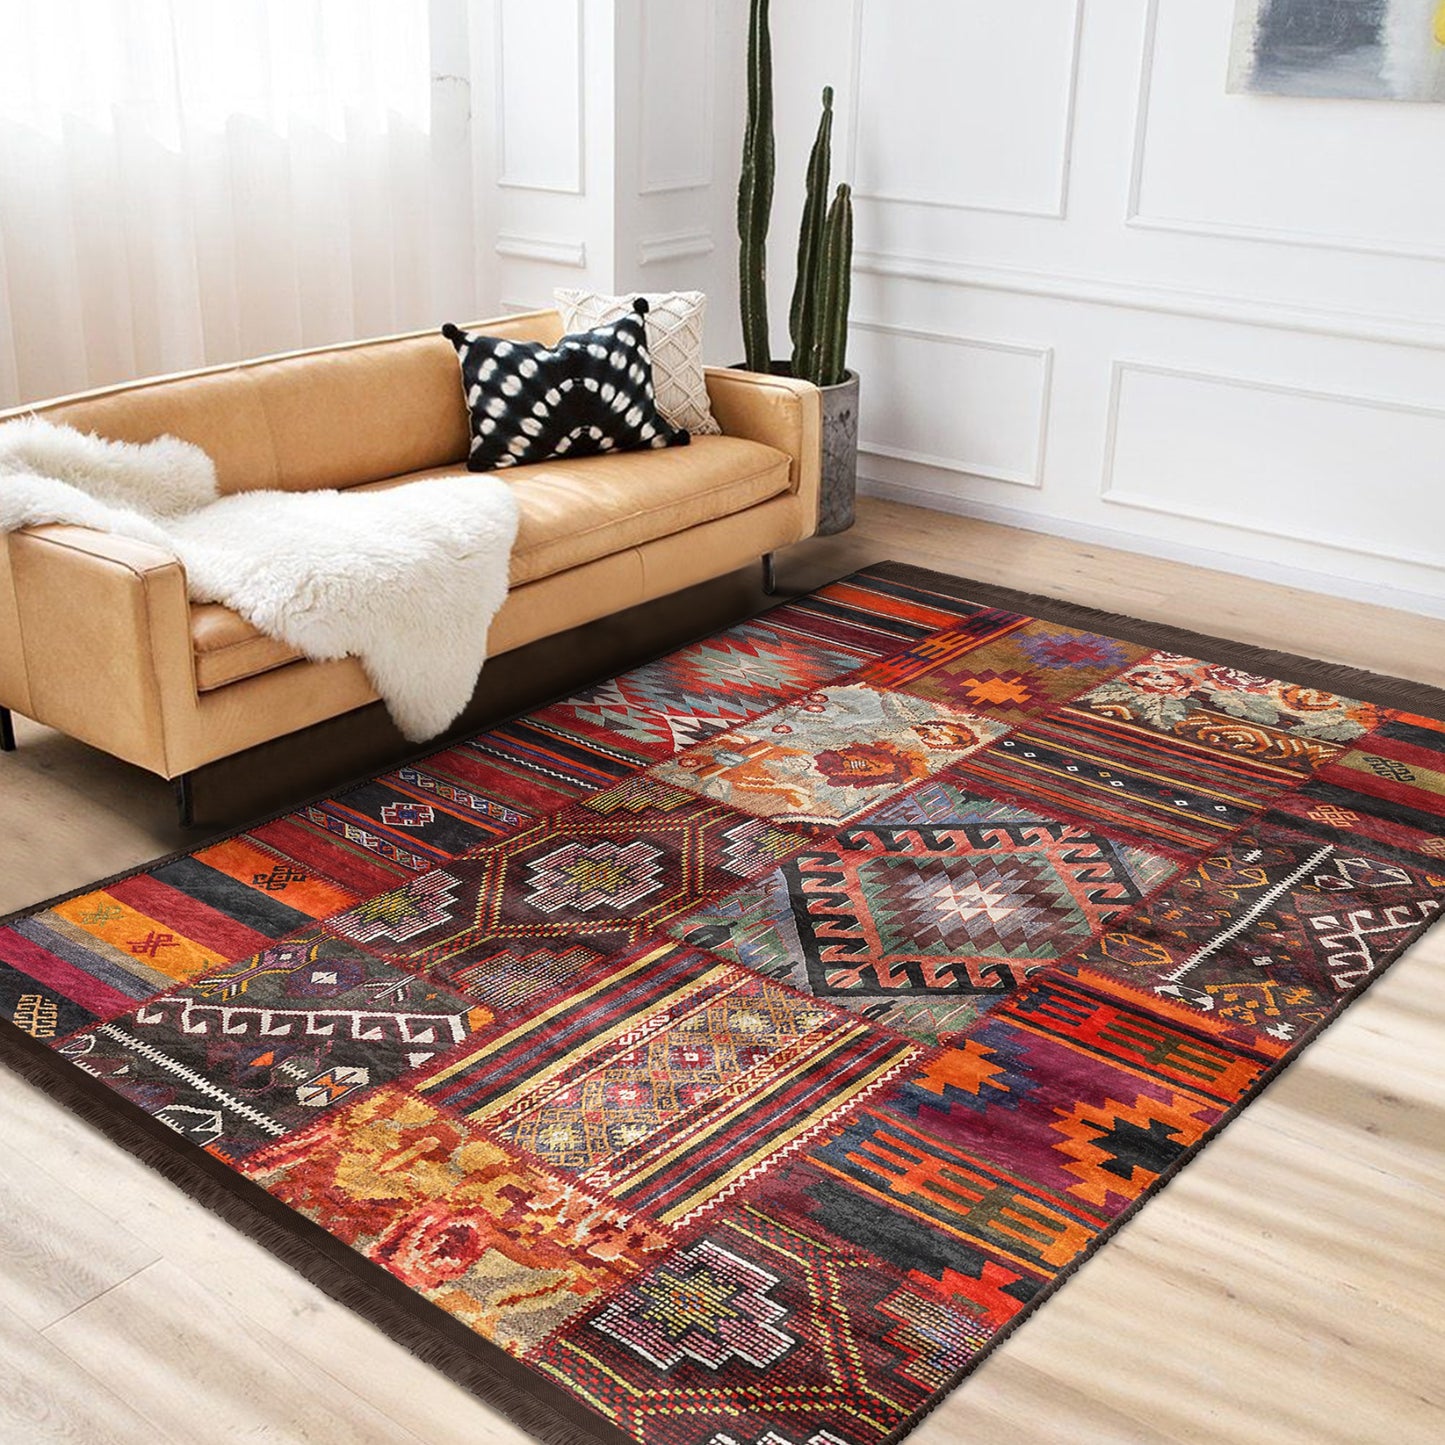 Elegant Rug with Classic Ethnic Home Decor Patterns